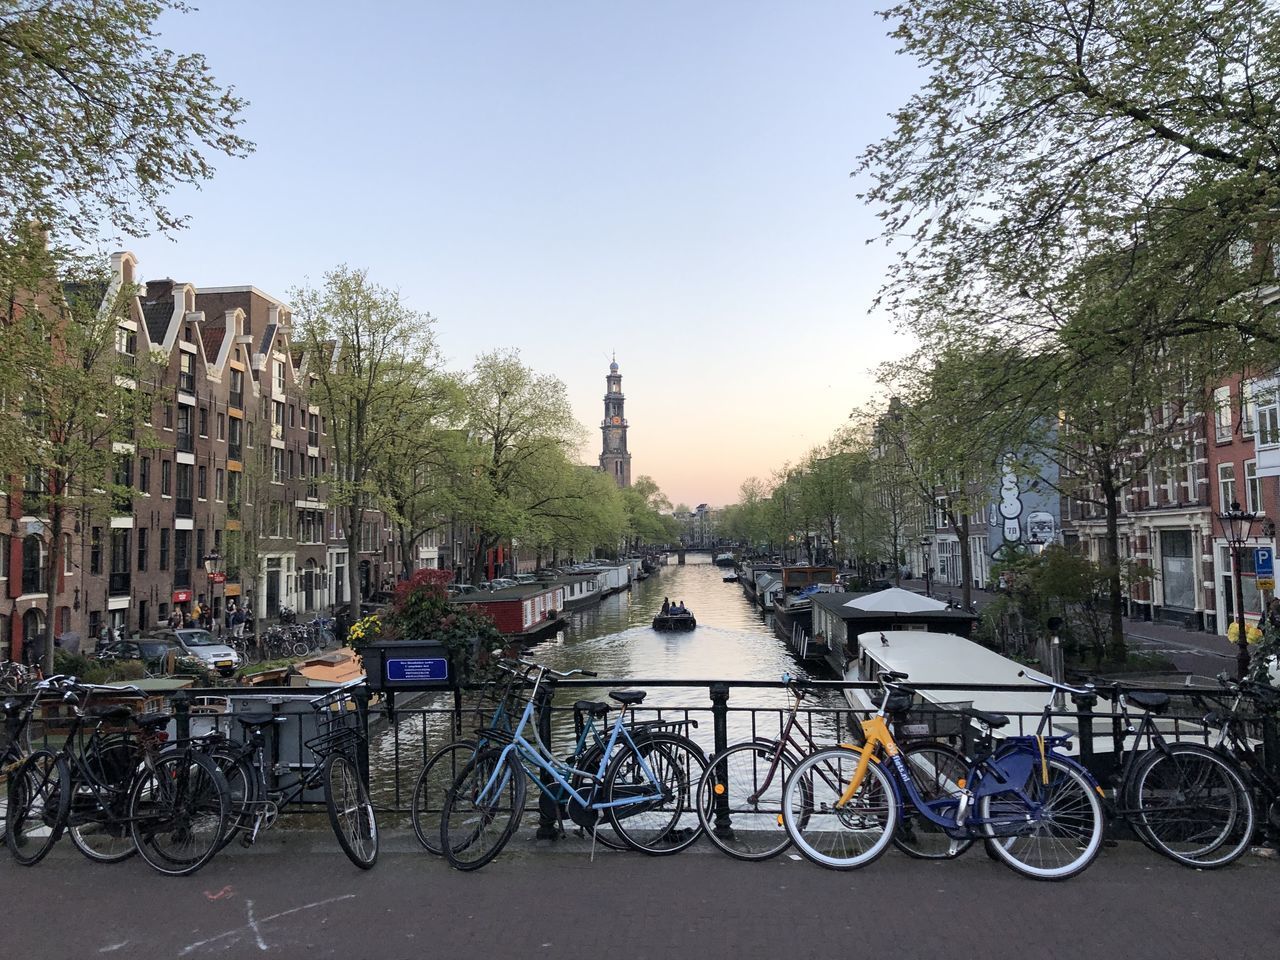 BICYCLES PARKED BY CANAL IN CITY AGAINST SKY